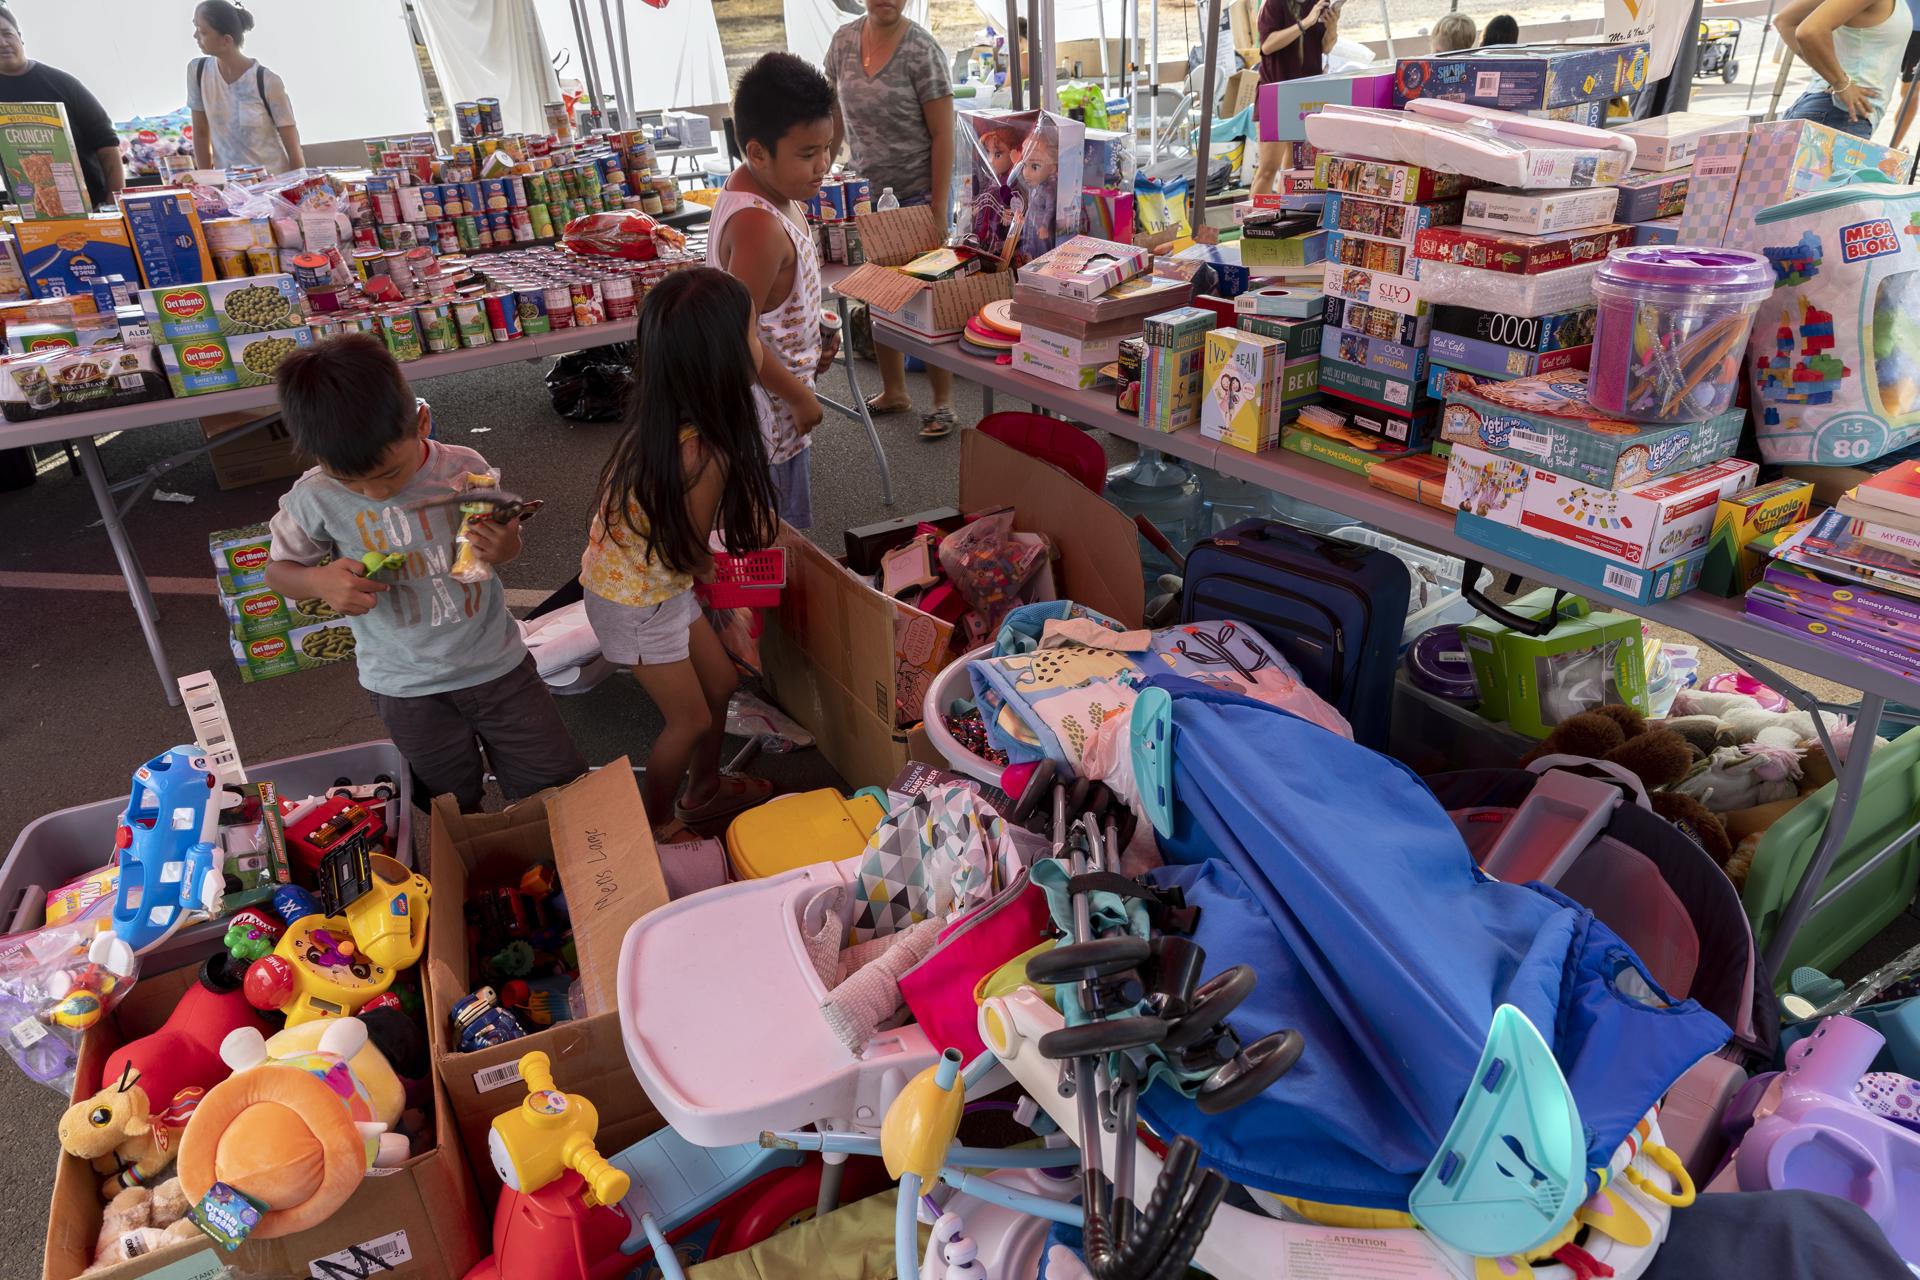 Daily (C), Liam (R) and their brother check boxes of donated toys at a distribution location in a neighborhood of Lahaina, Hawaii, USA, 13 August 2023. EFE-EPA/ETIENNE LAURENT
